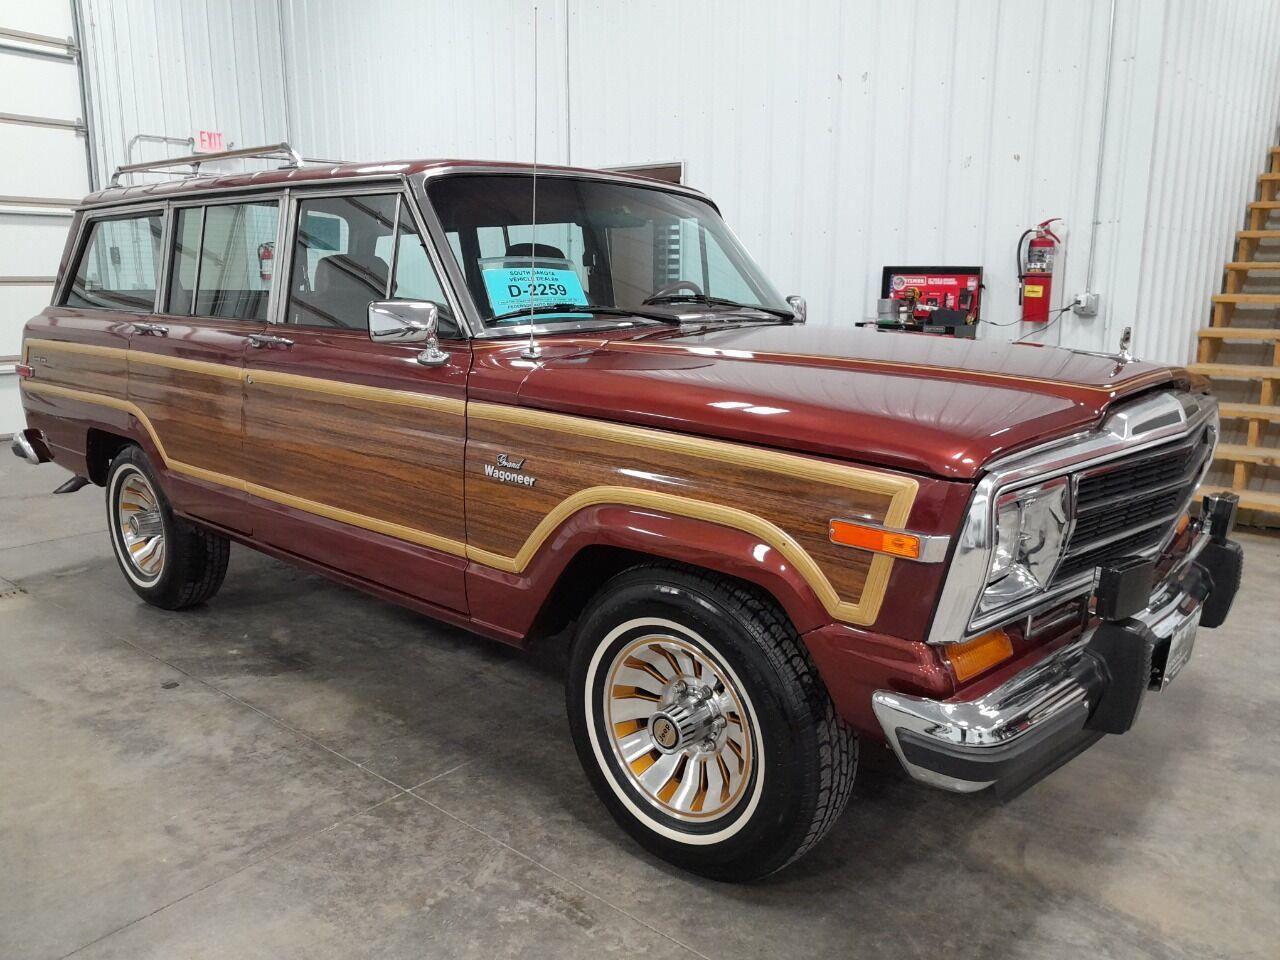 For Sale: 1986 Jeep Grand Wagoneer in Sioux Falls, South Dakota for sale in Sioux Falls, SD